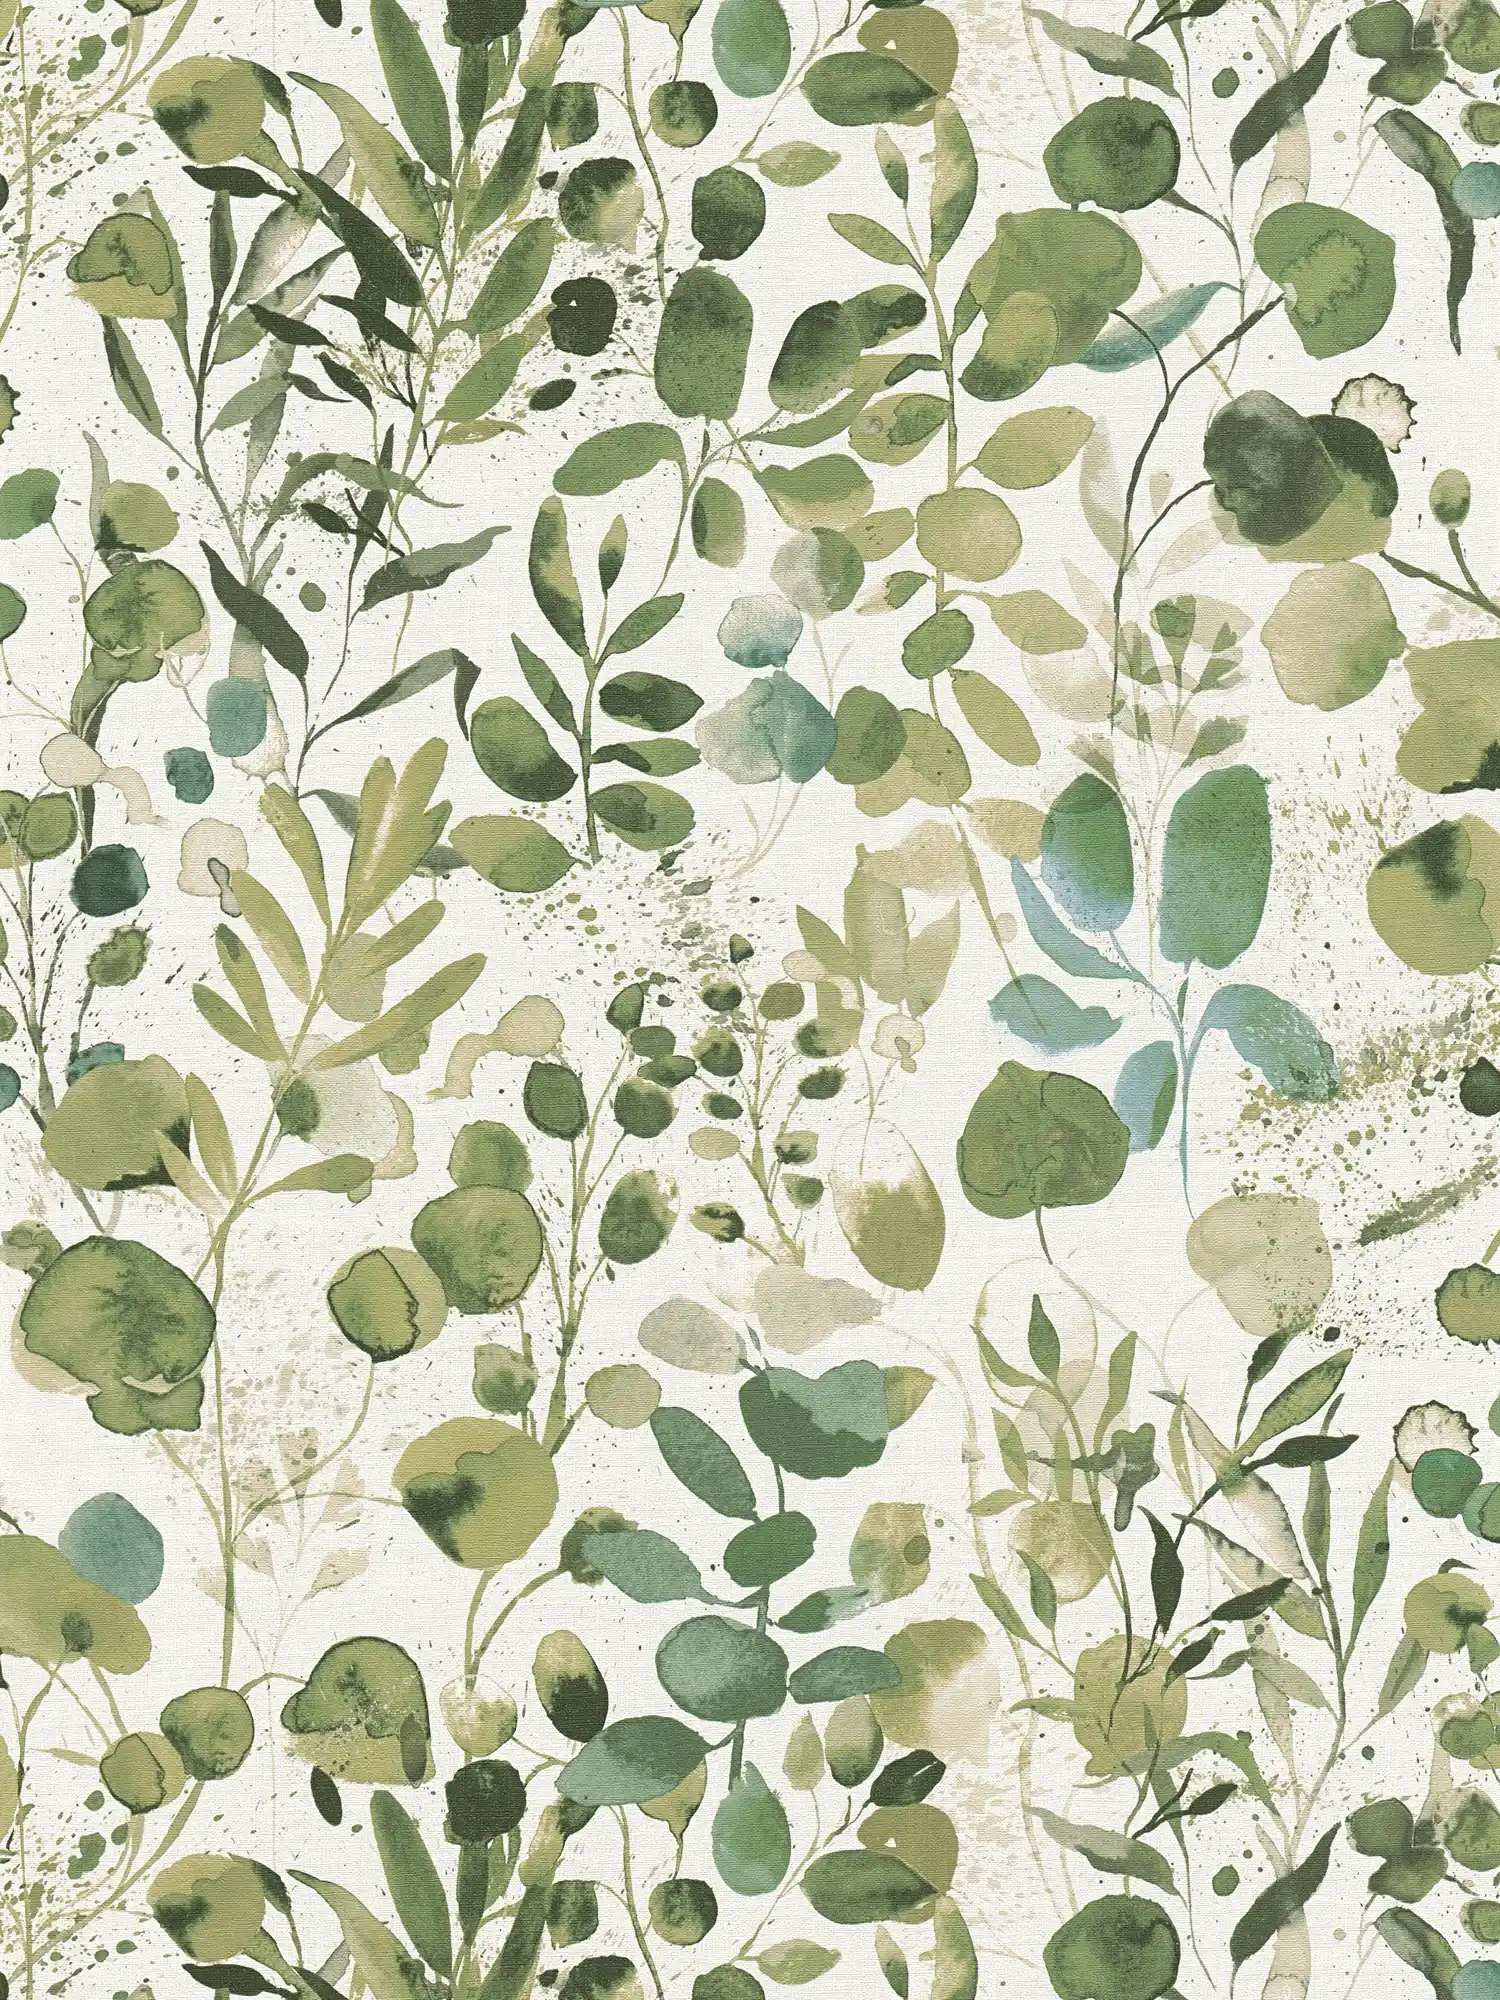 Non-woven wallpaper leaf motif with splashes of colour accents - green, blue, white
